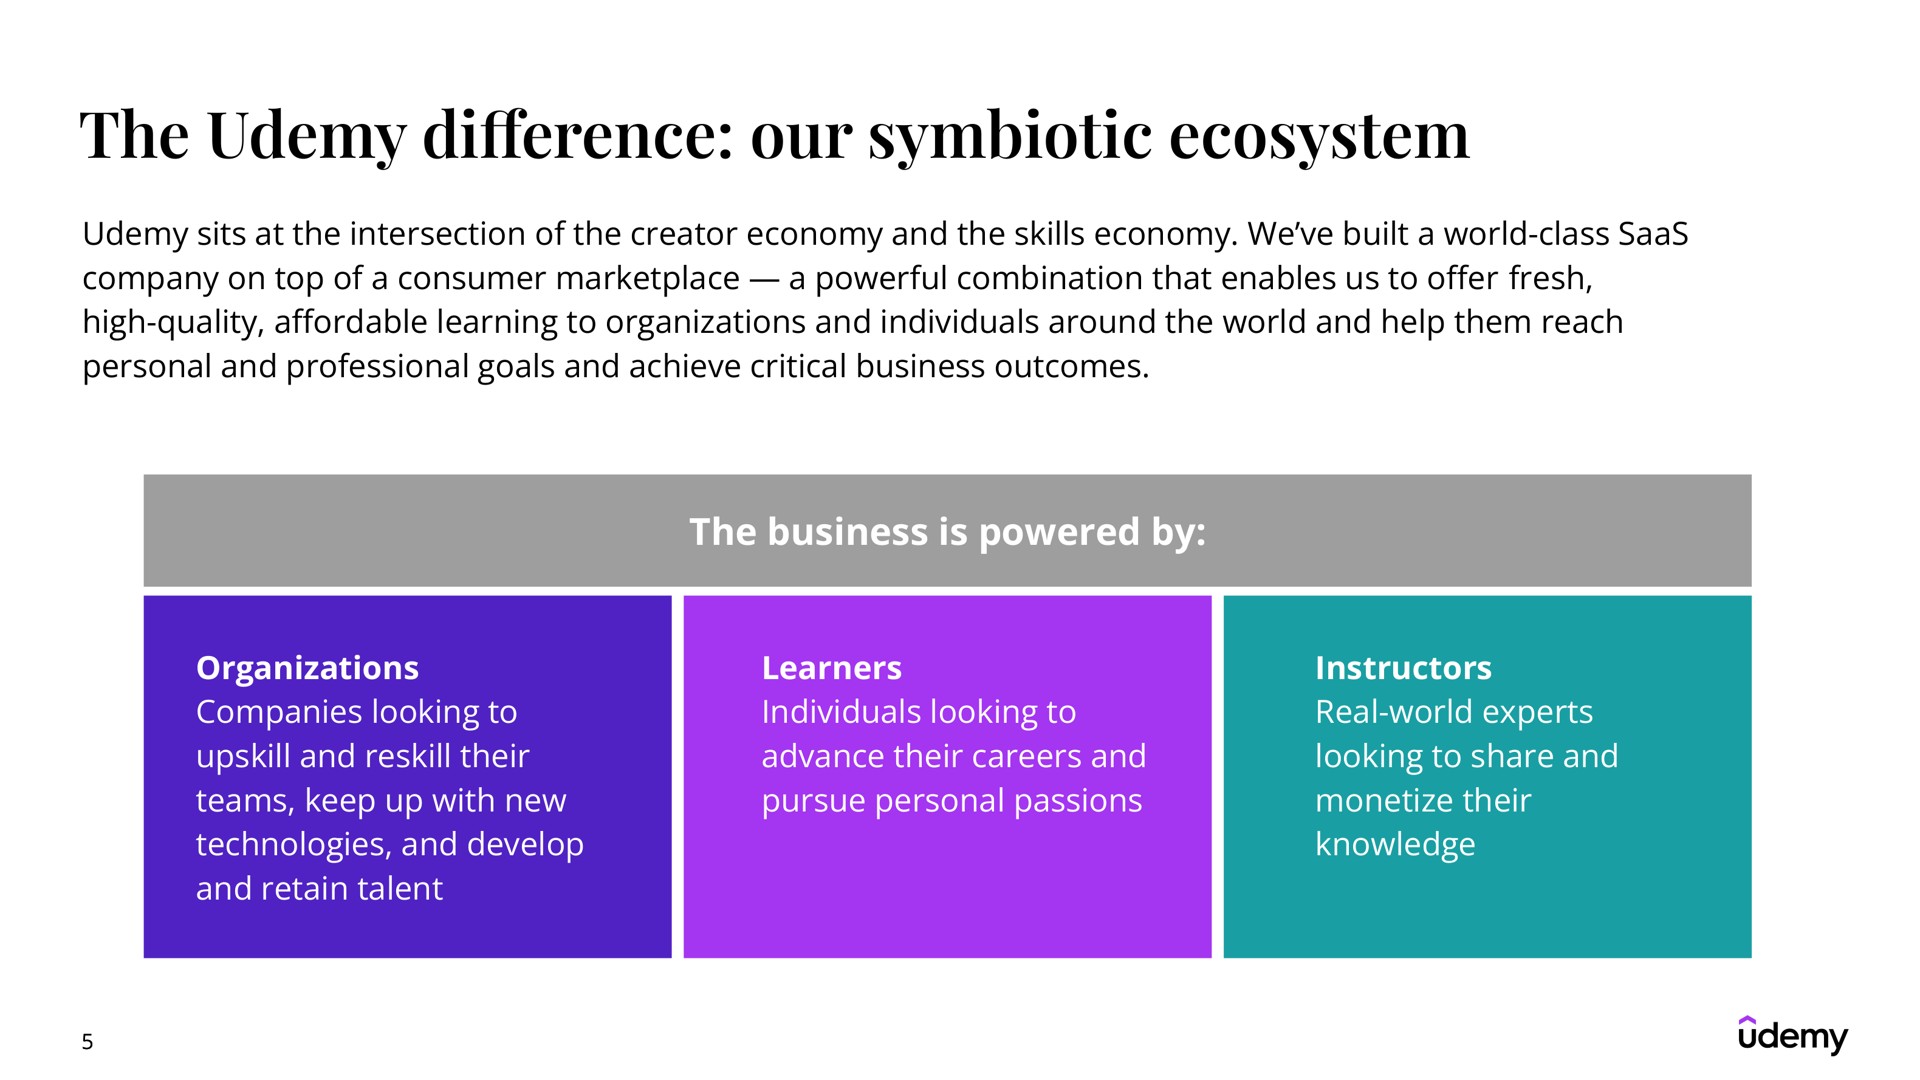 the difference our symbiotic ecosystem | Udemy